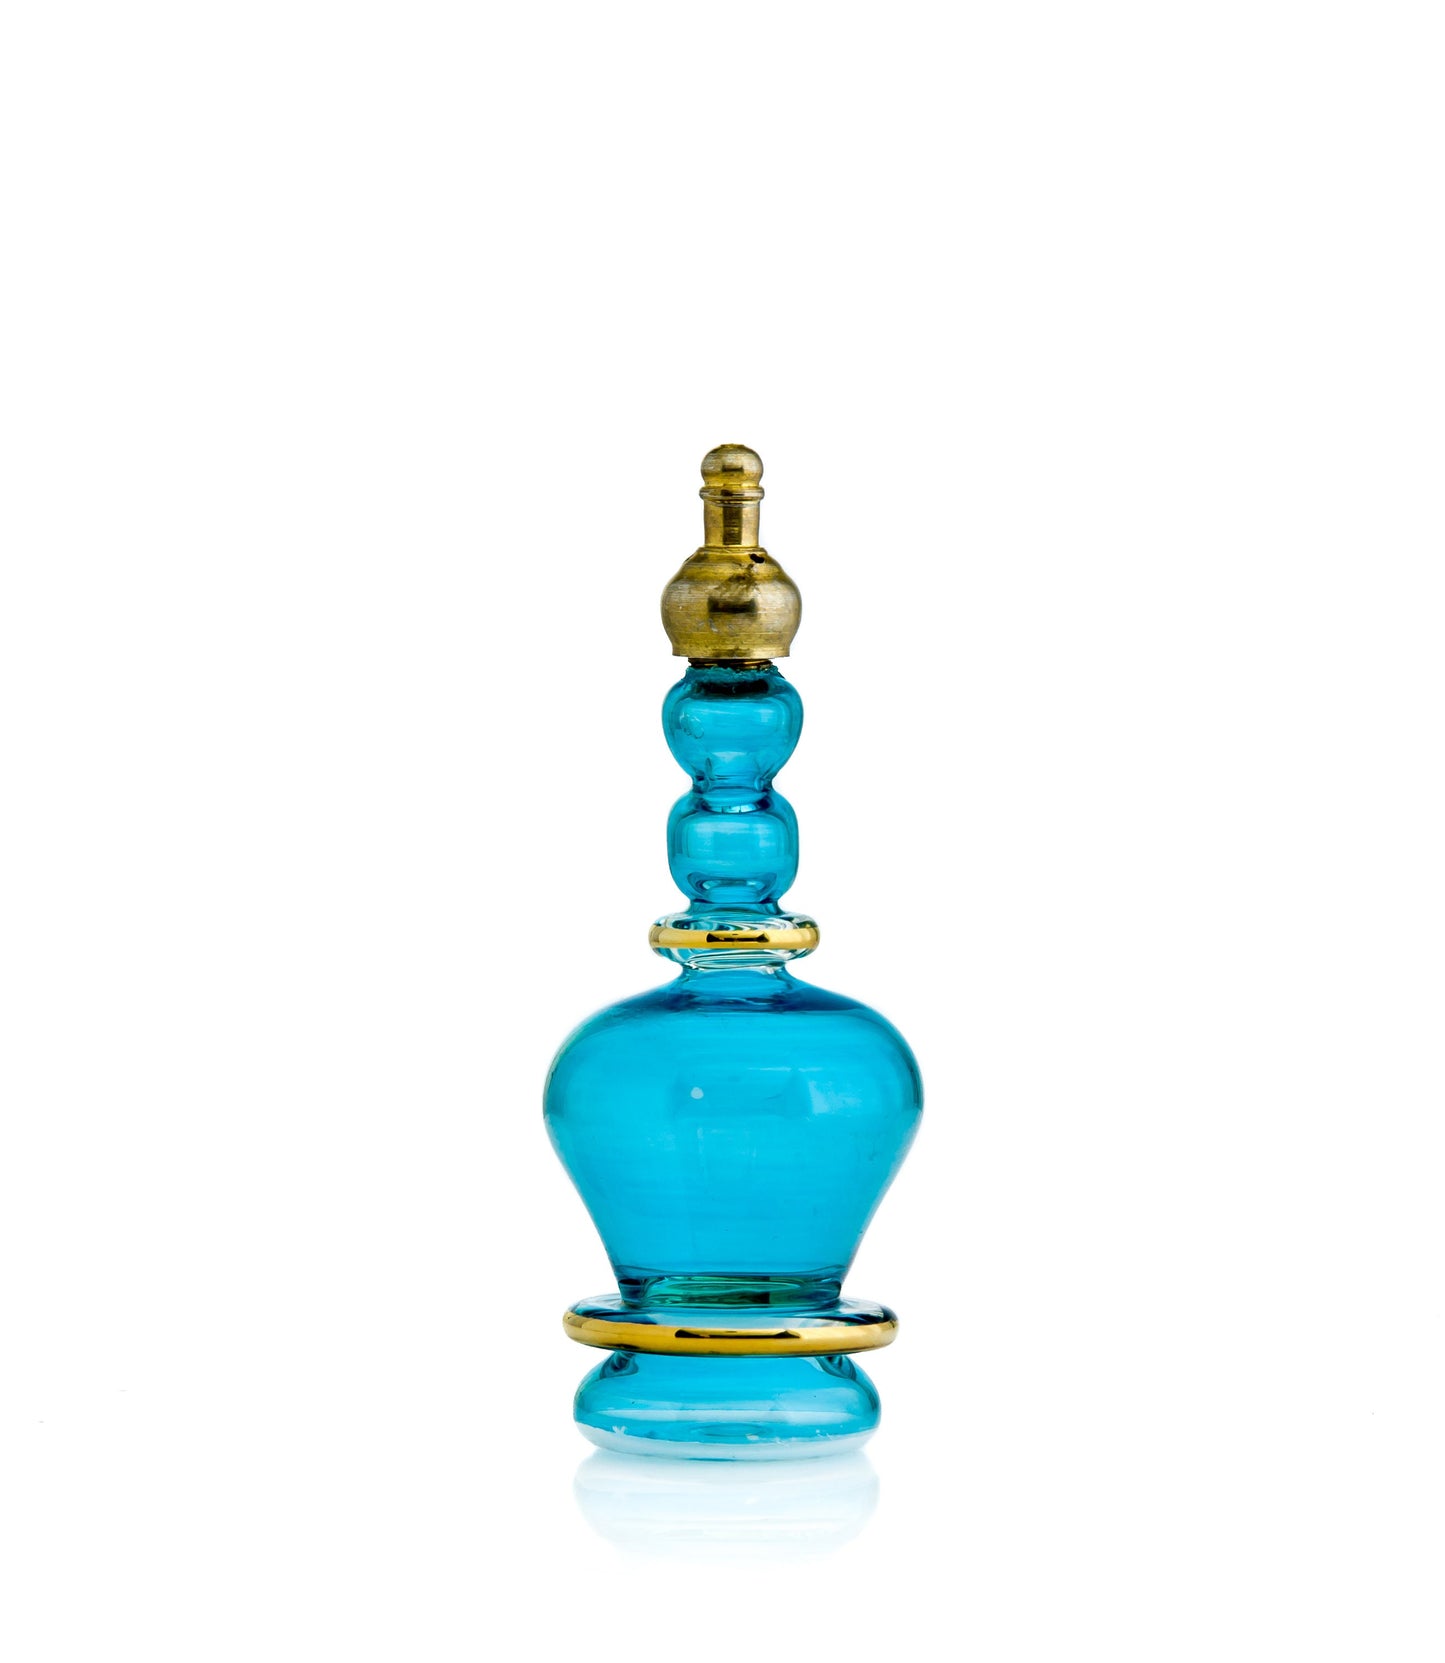 Turquoise decorative perfume bottle with copper stopper - Hand painted - colored glassware - antique glassware - empty perfume bottle